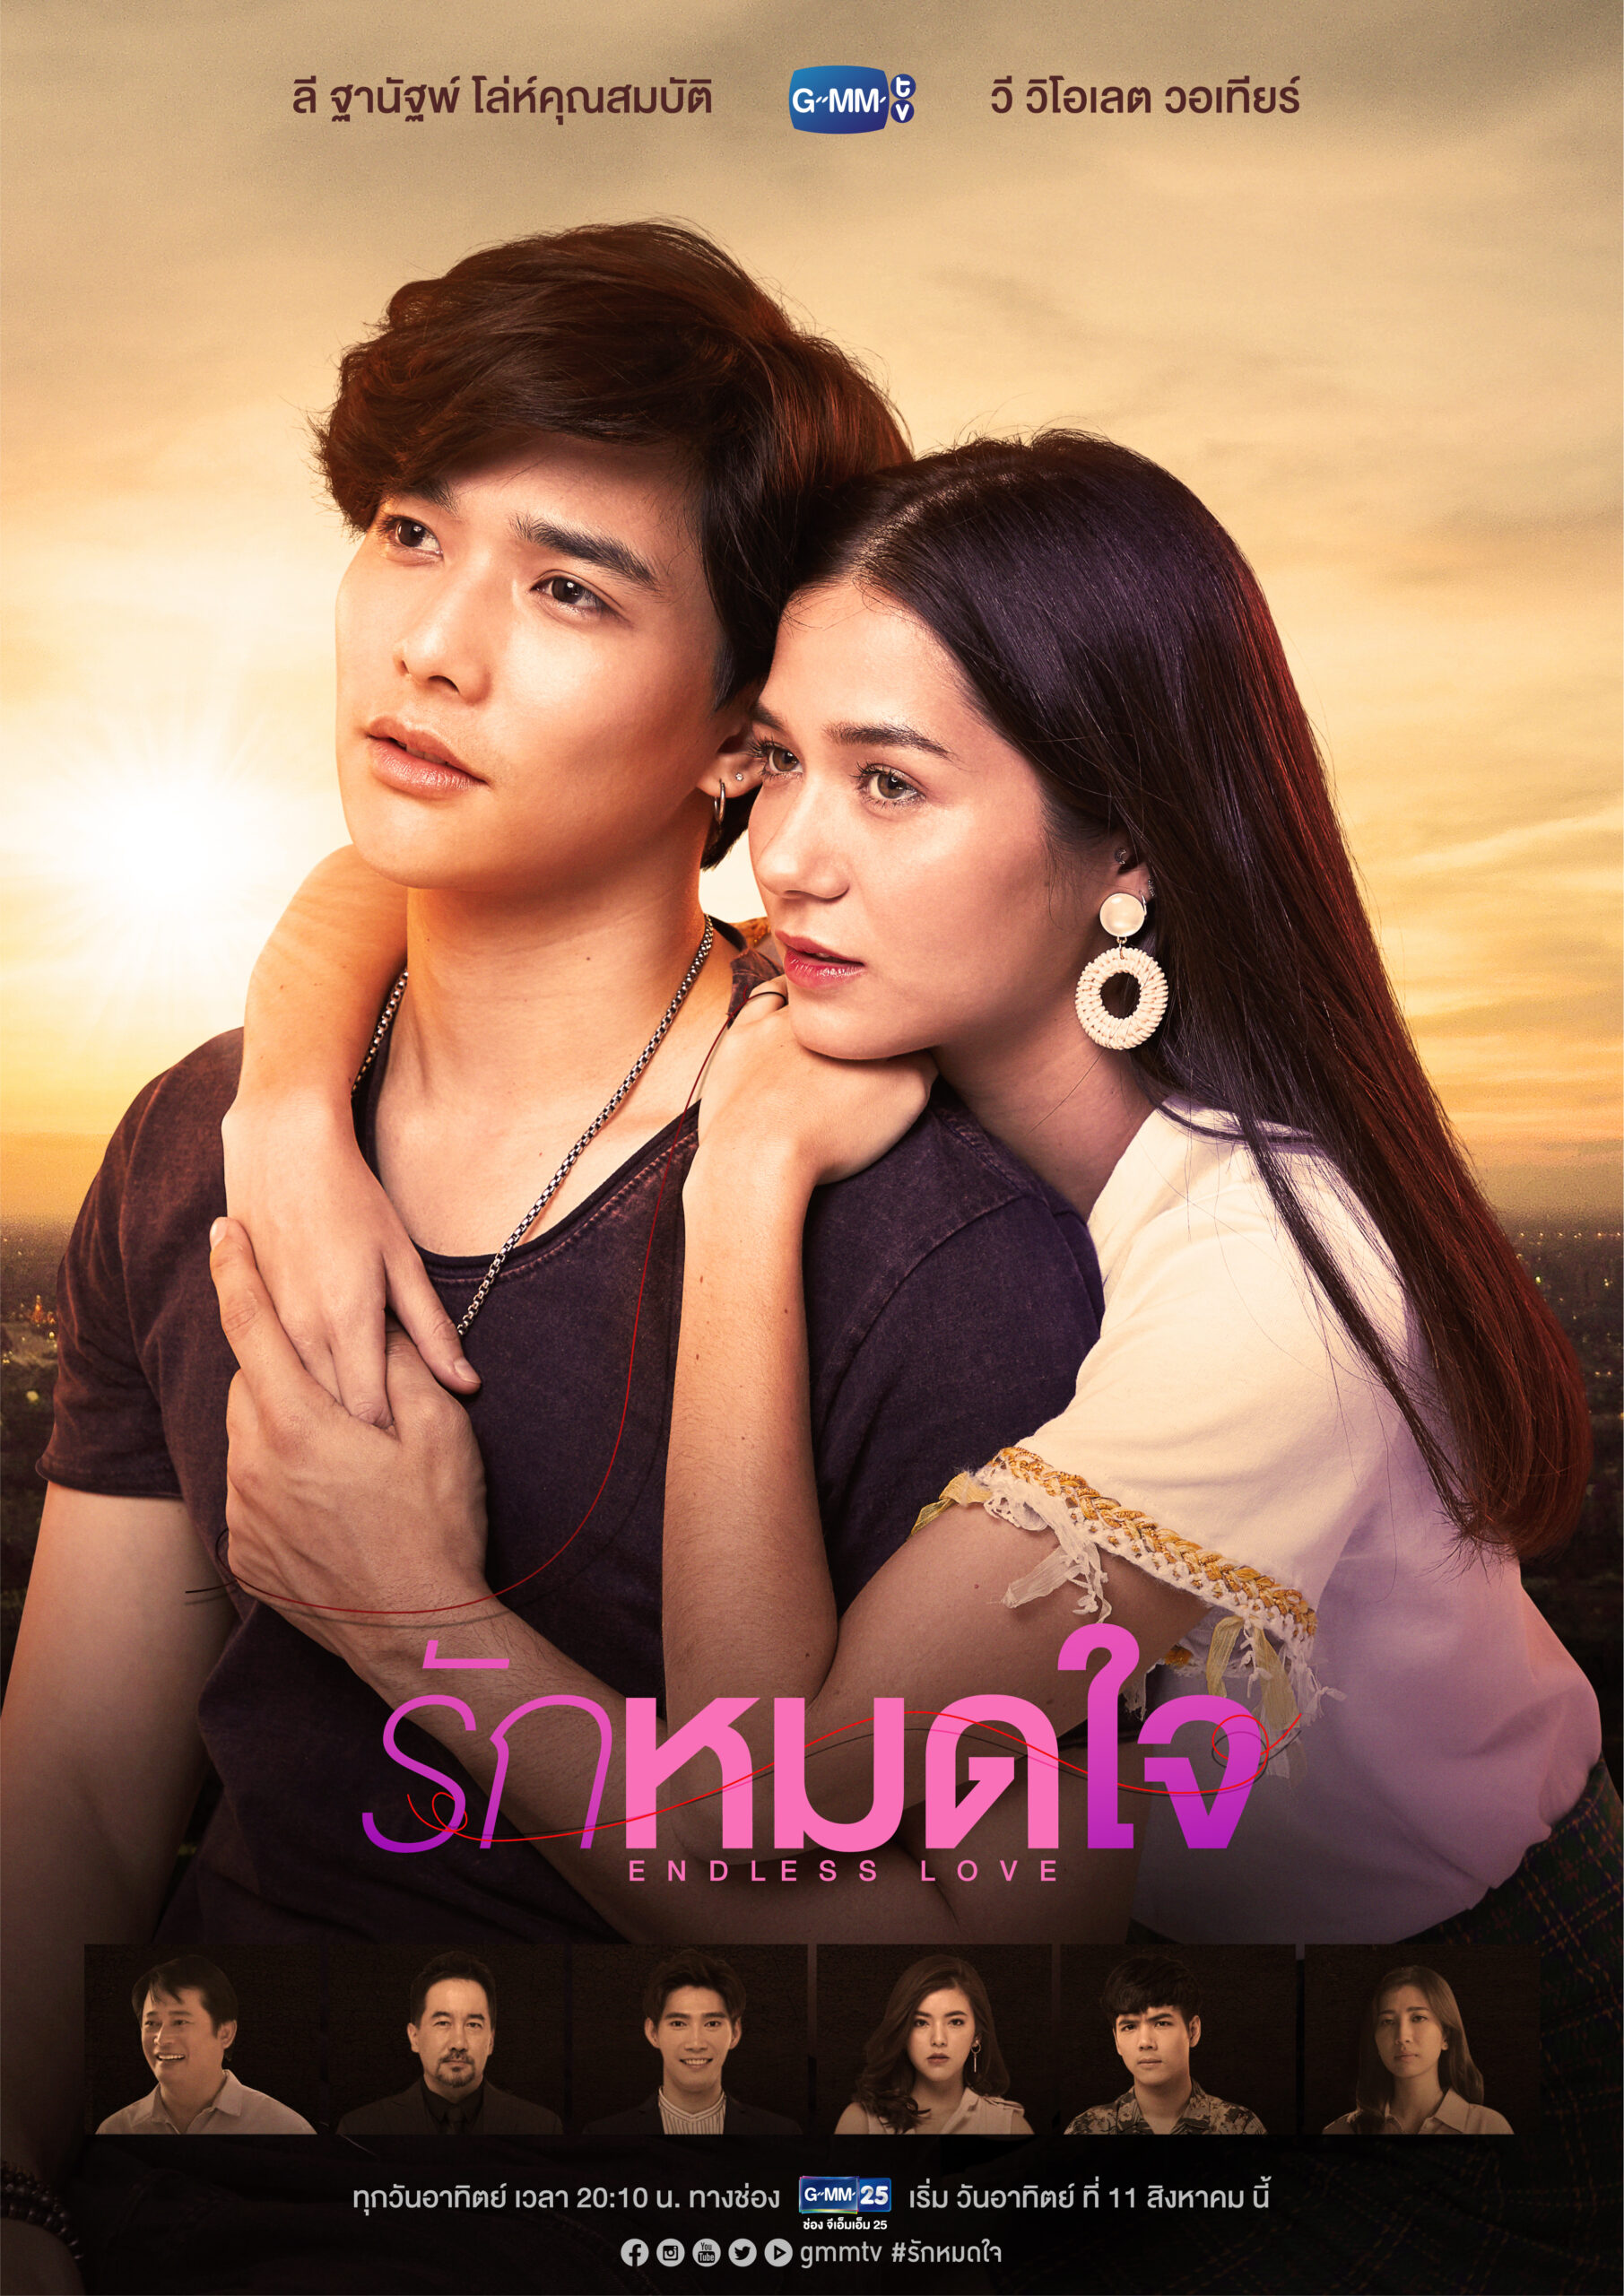 Min Wattana in From Thailand With Love Video